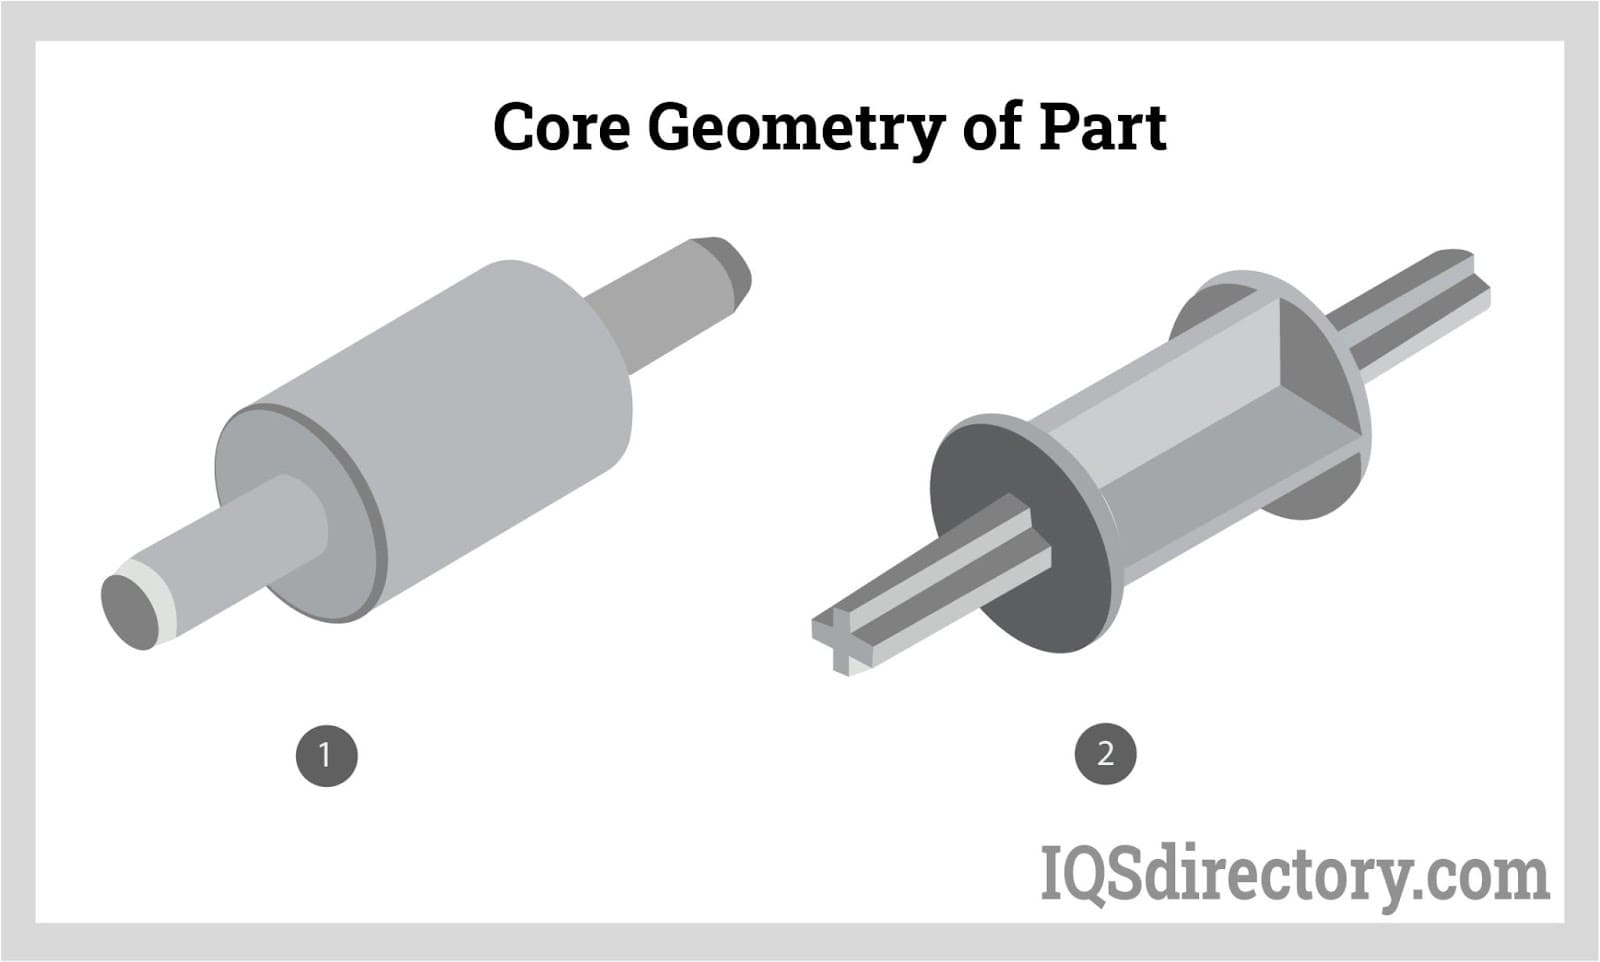 Core Geometry of Part